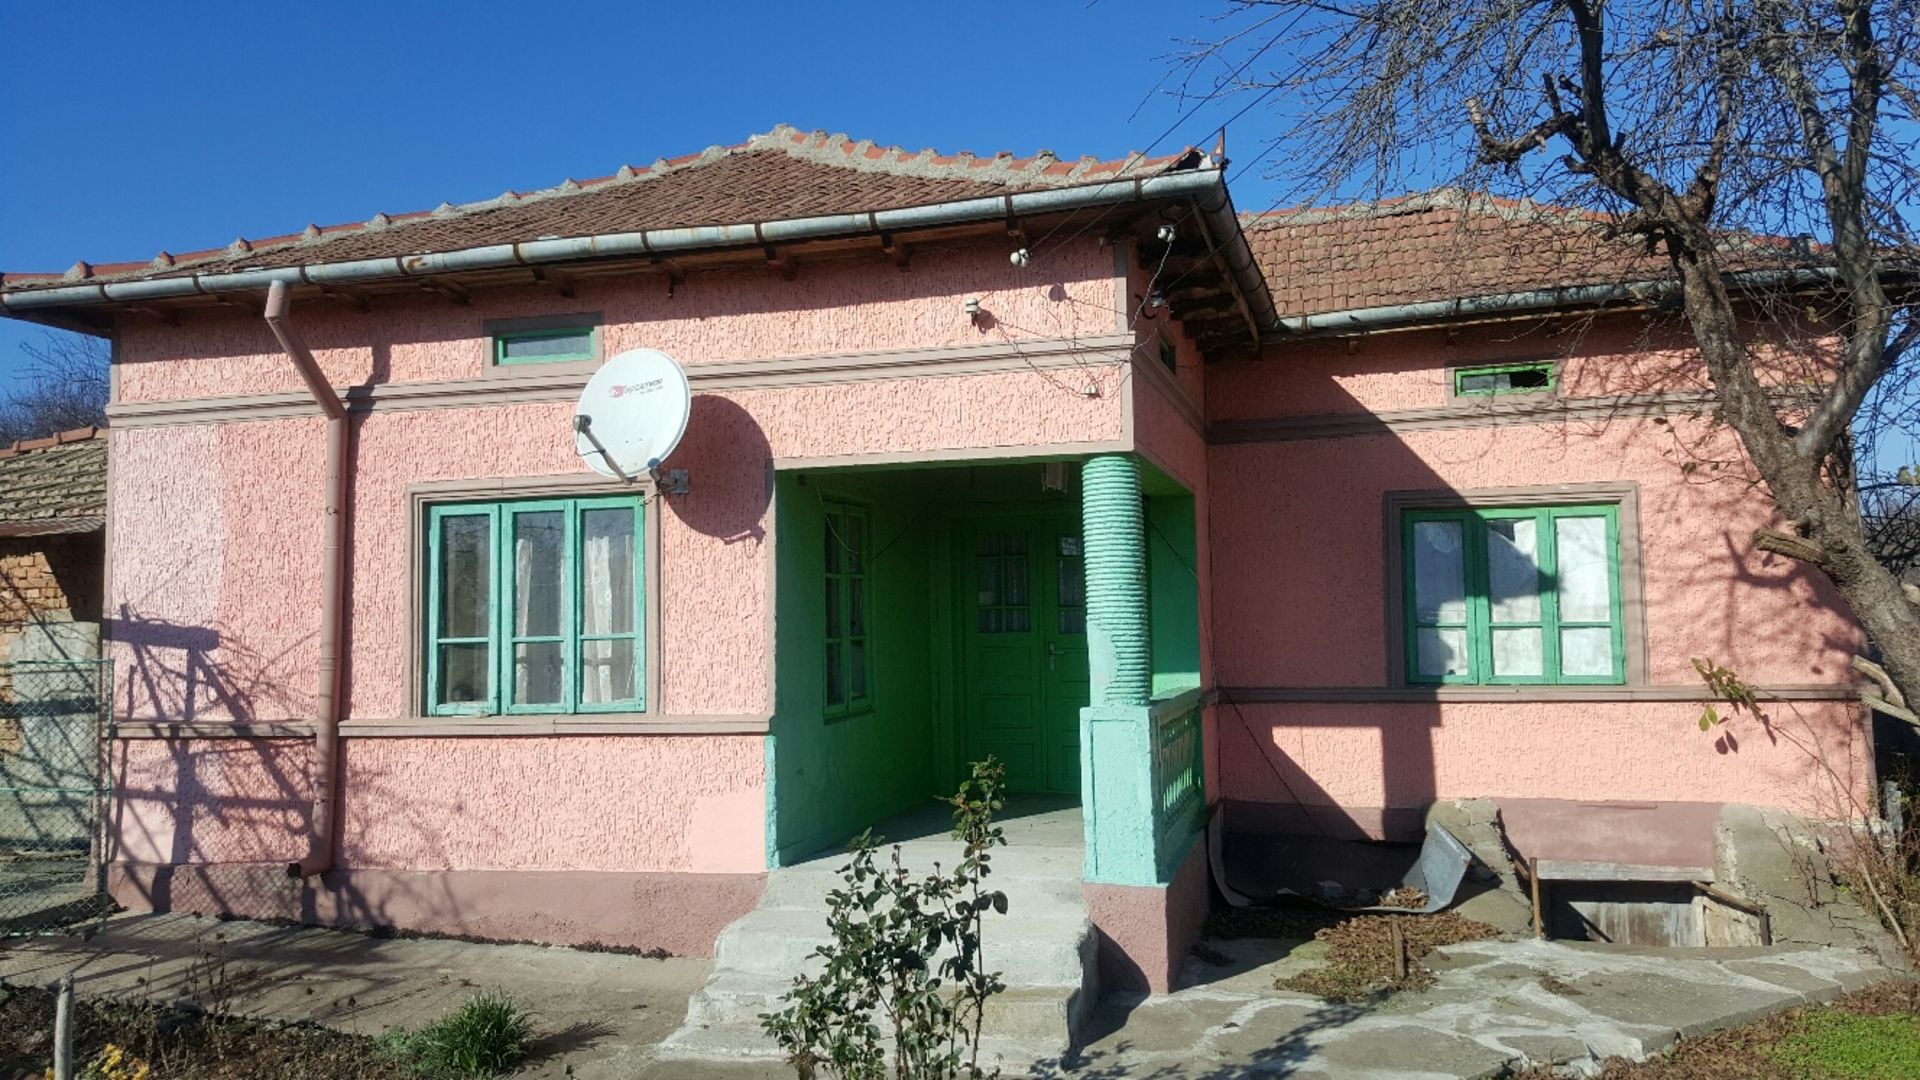 7 ROOM BULGARIAN COTTAGE IN IZVOROVO FOR SALE. WITH LAND NOT FAR FROM COAST - Image 2 of 41